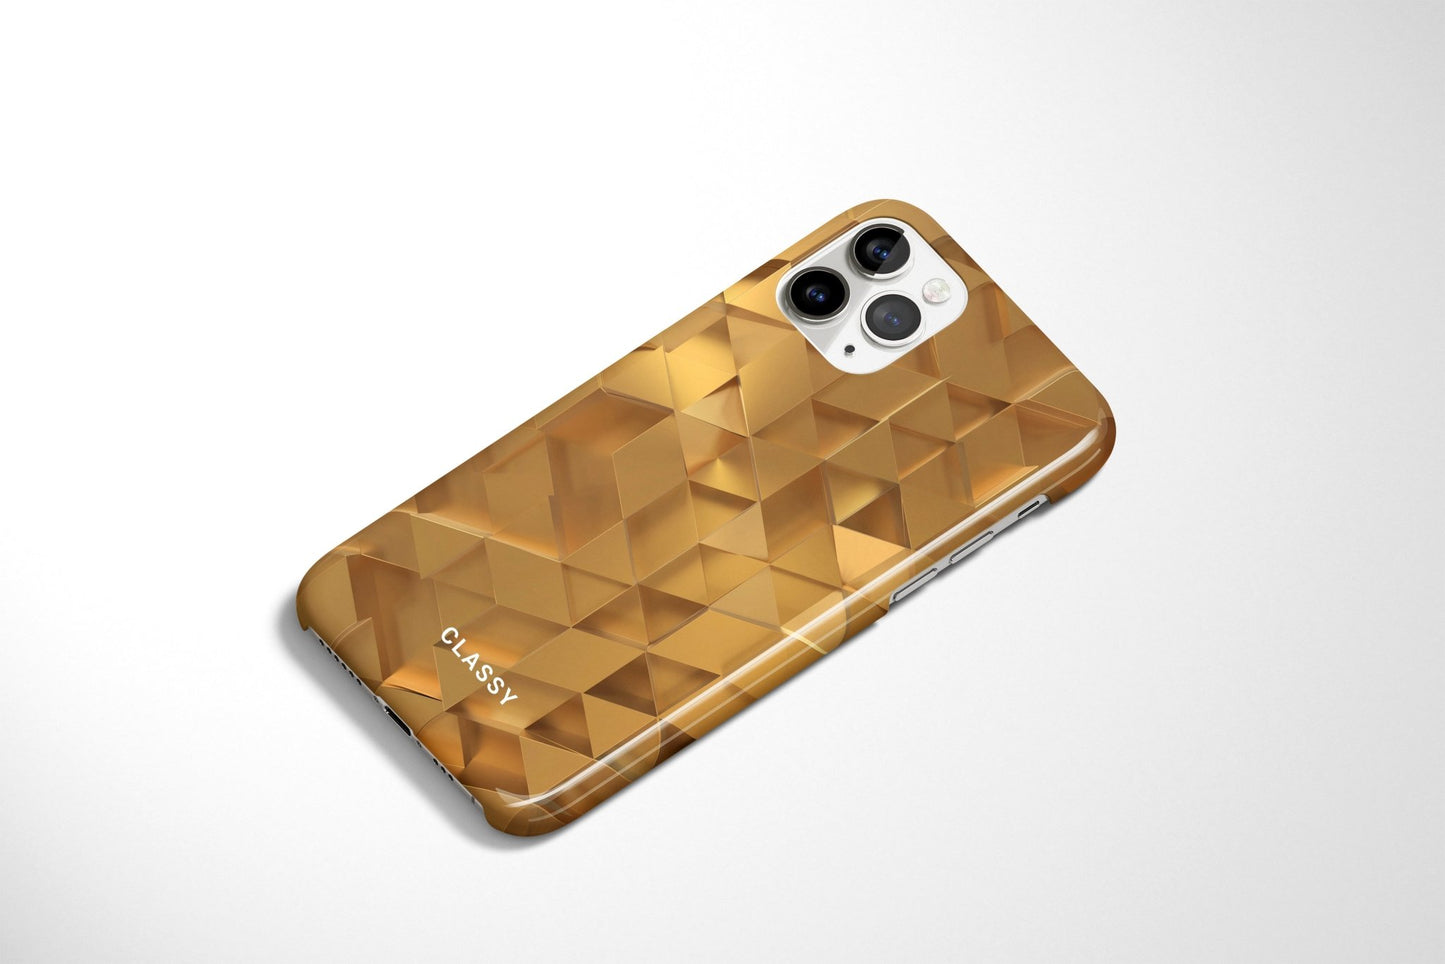 Gold Check Pattern Snap Case - Classy Cases